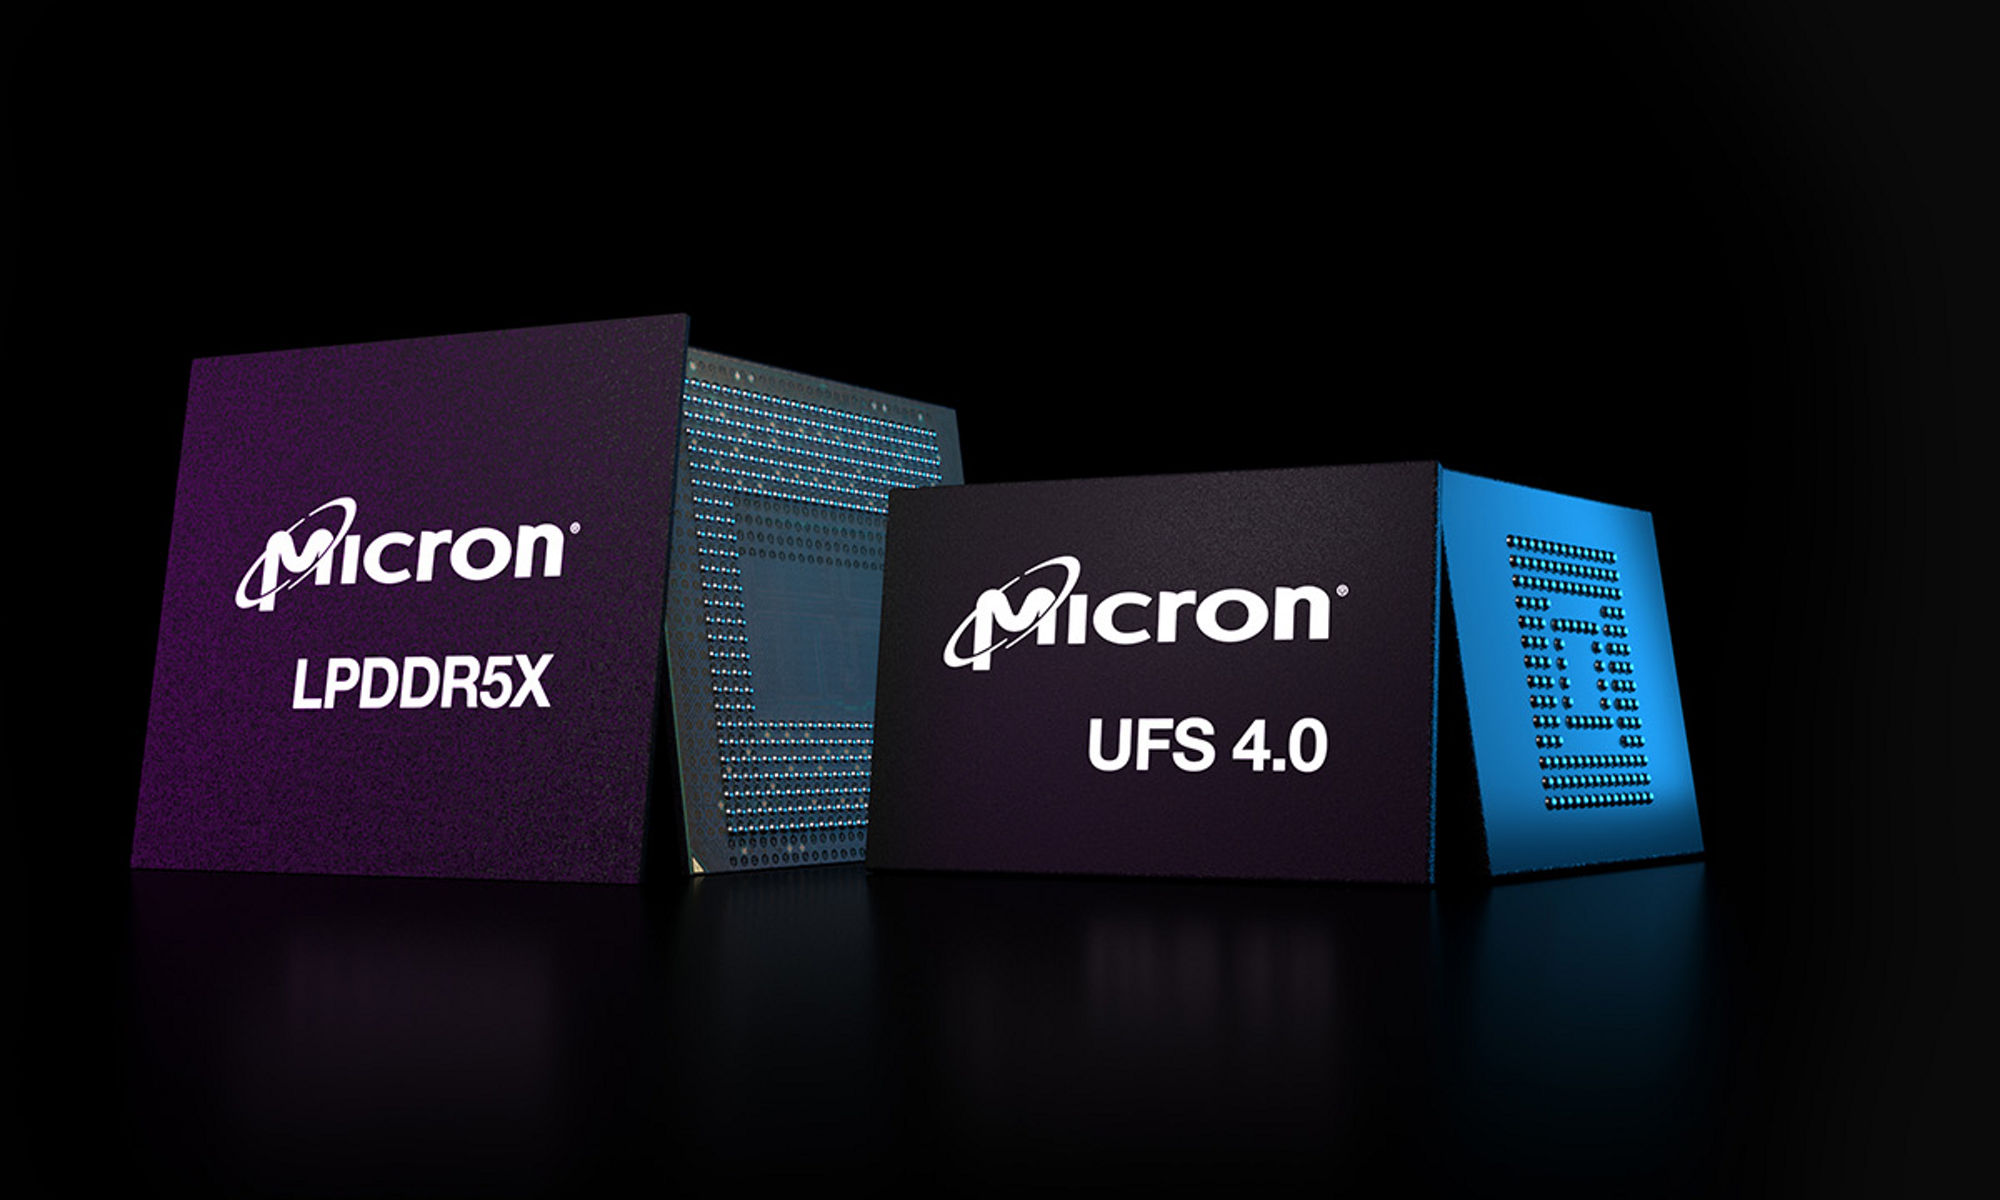 A side by side of a Micron LPDDR5X chip and Micron UFS 4.0 chip